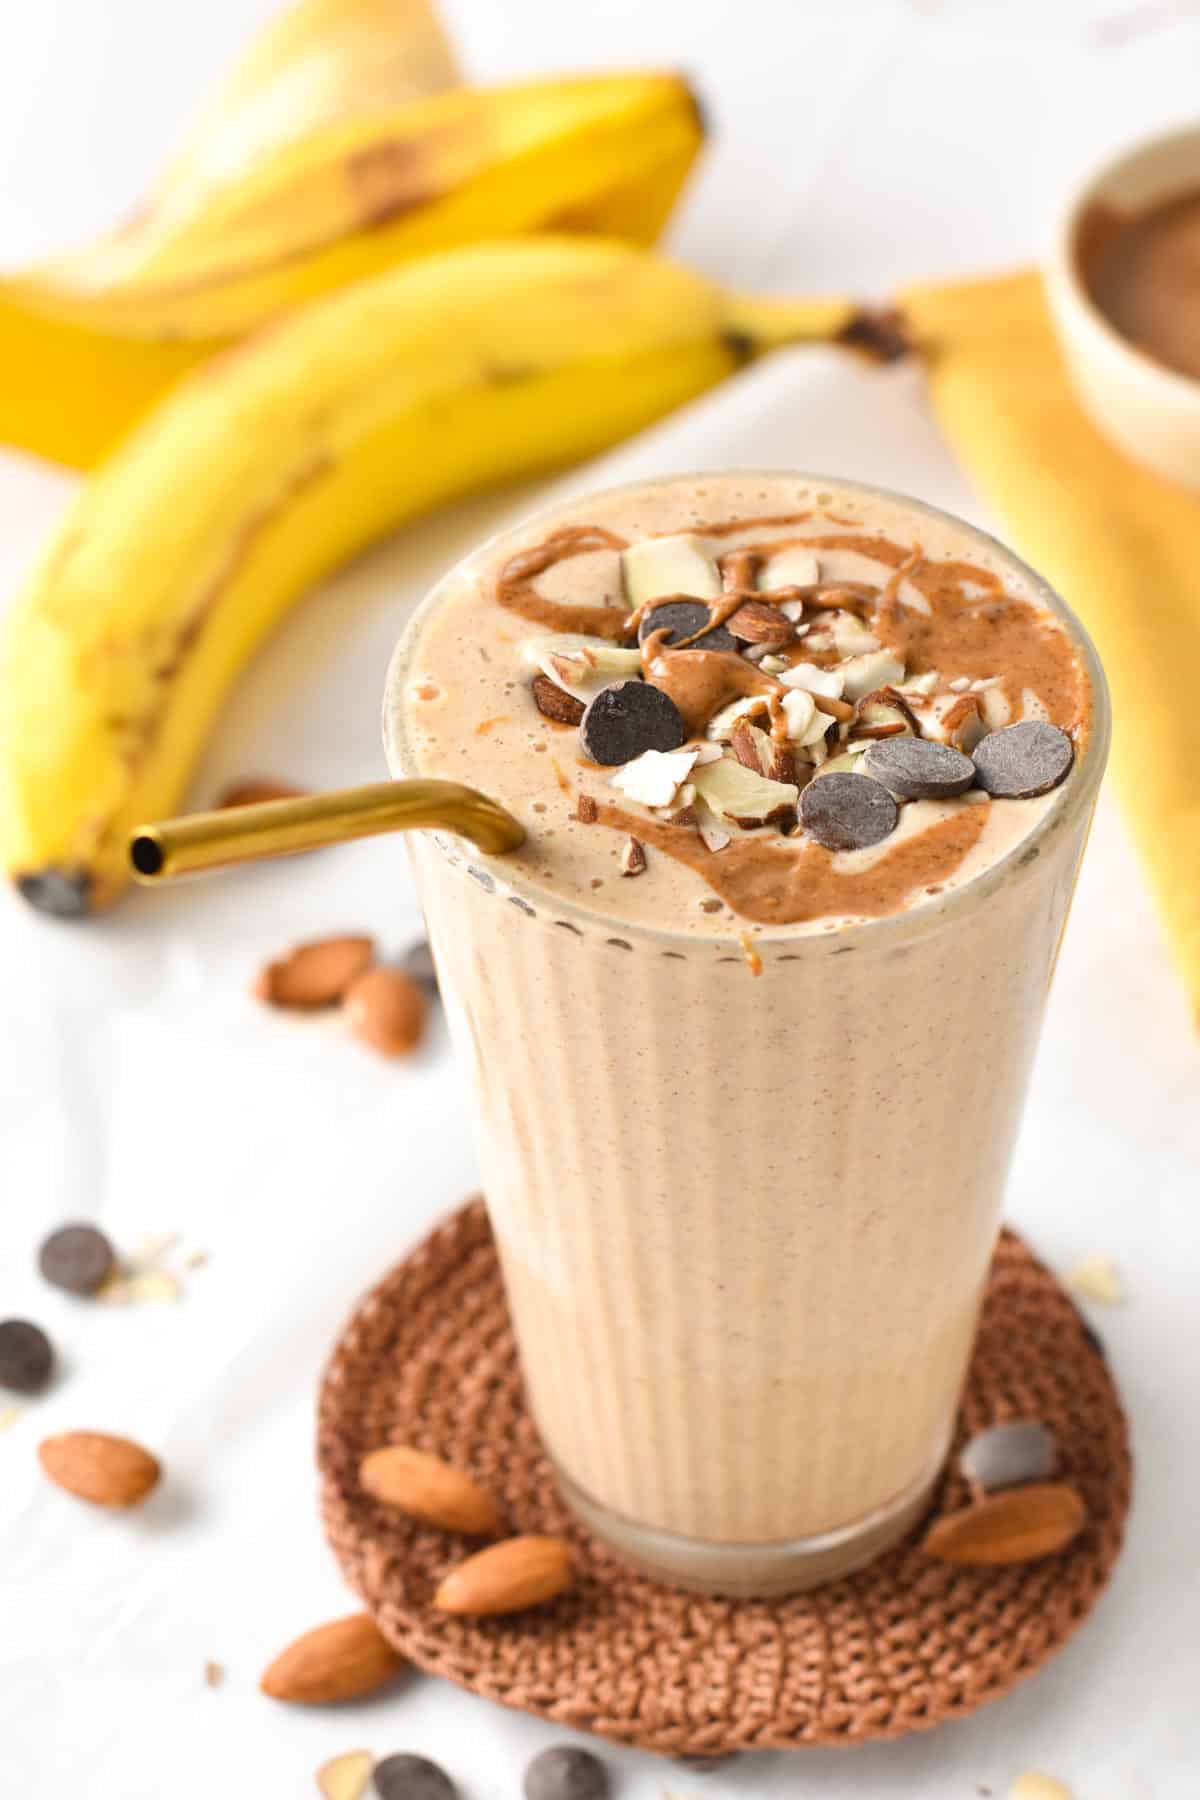 85 Of The Most Delicious Recipes With Bananas